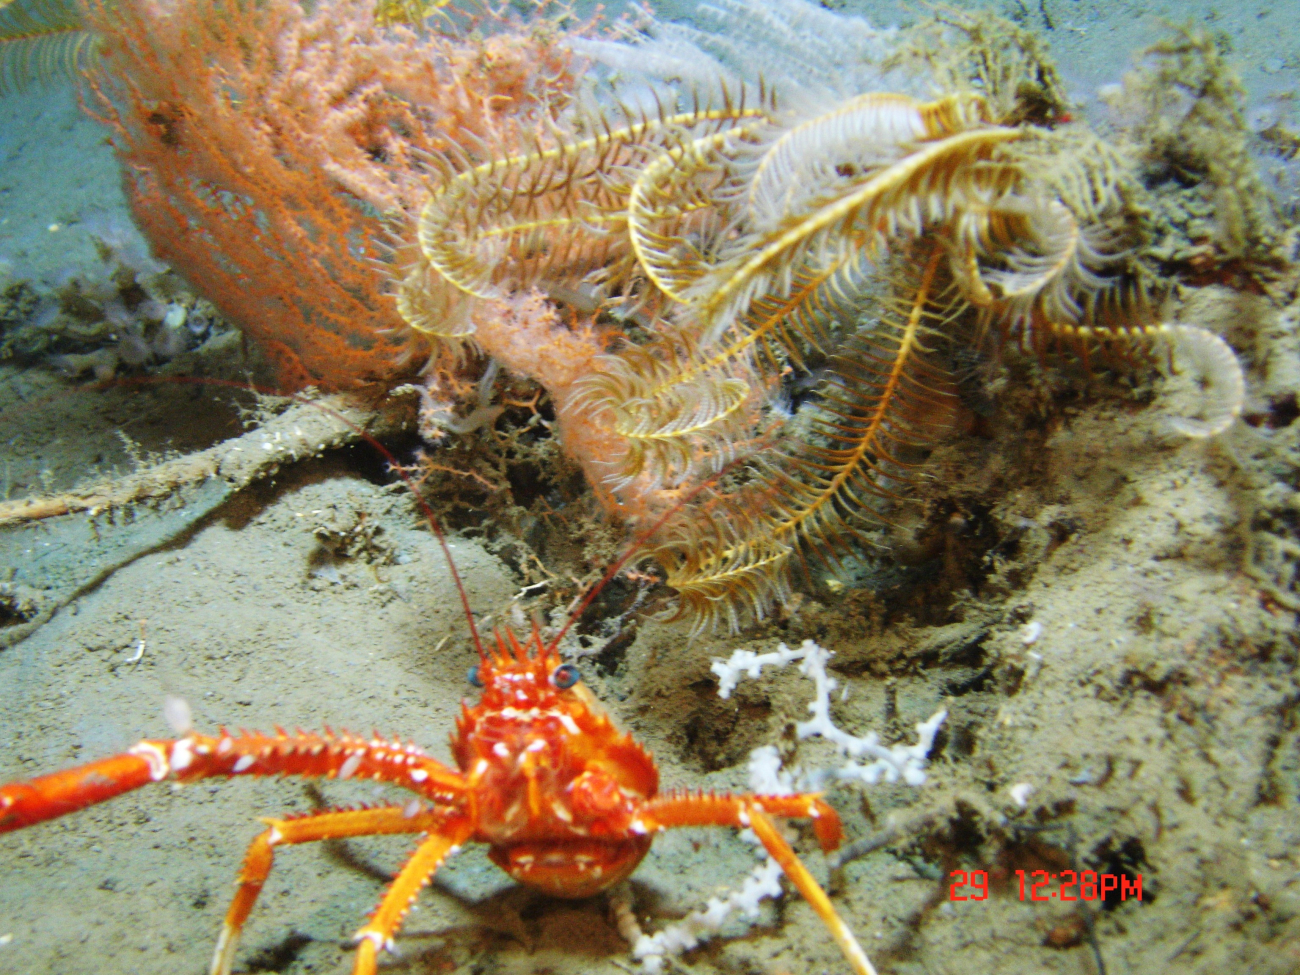 Closeup of a large squat lobster with yellow feather star crinoid and pinkishorange octocoral behind the squat lobster